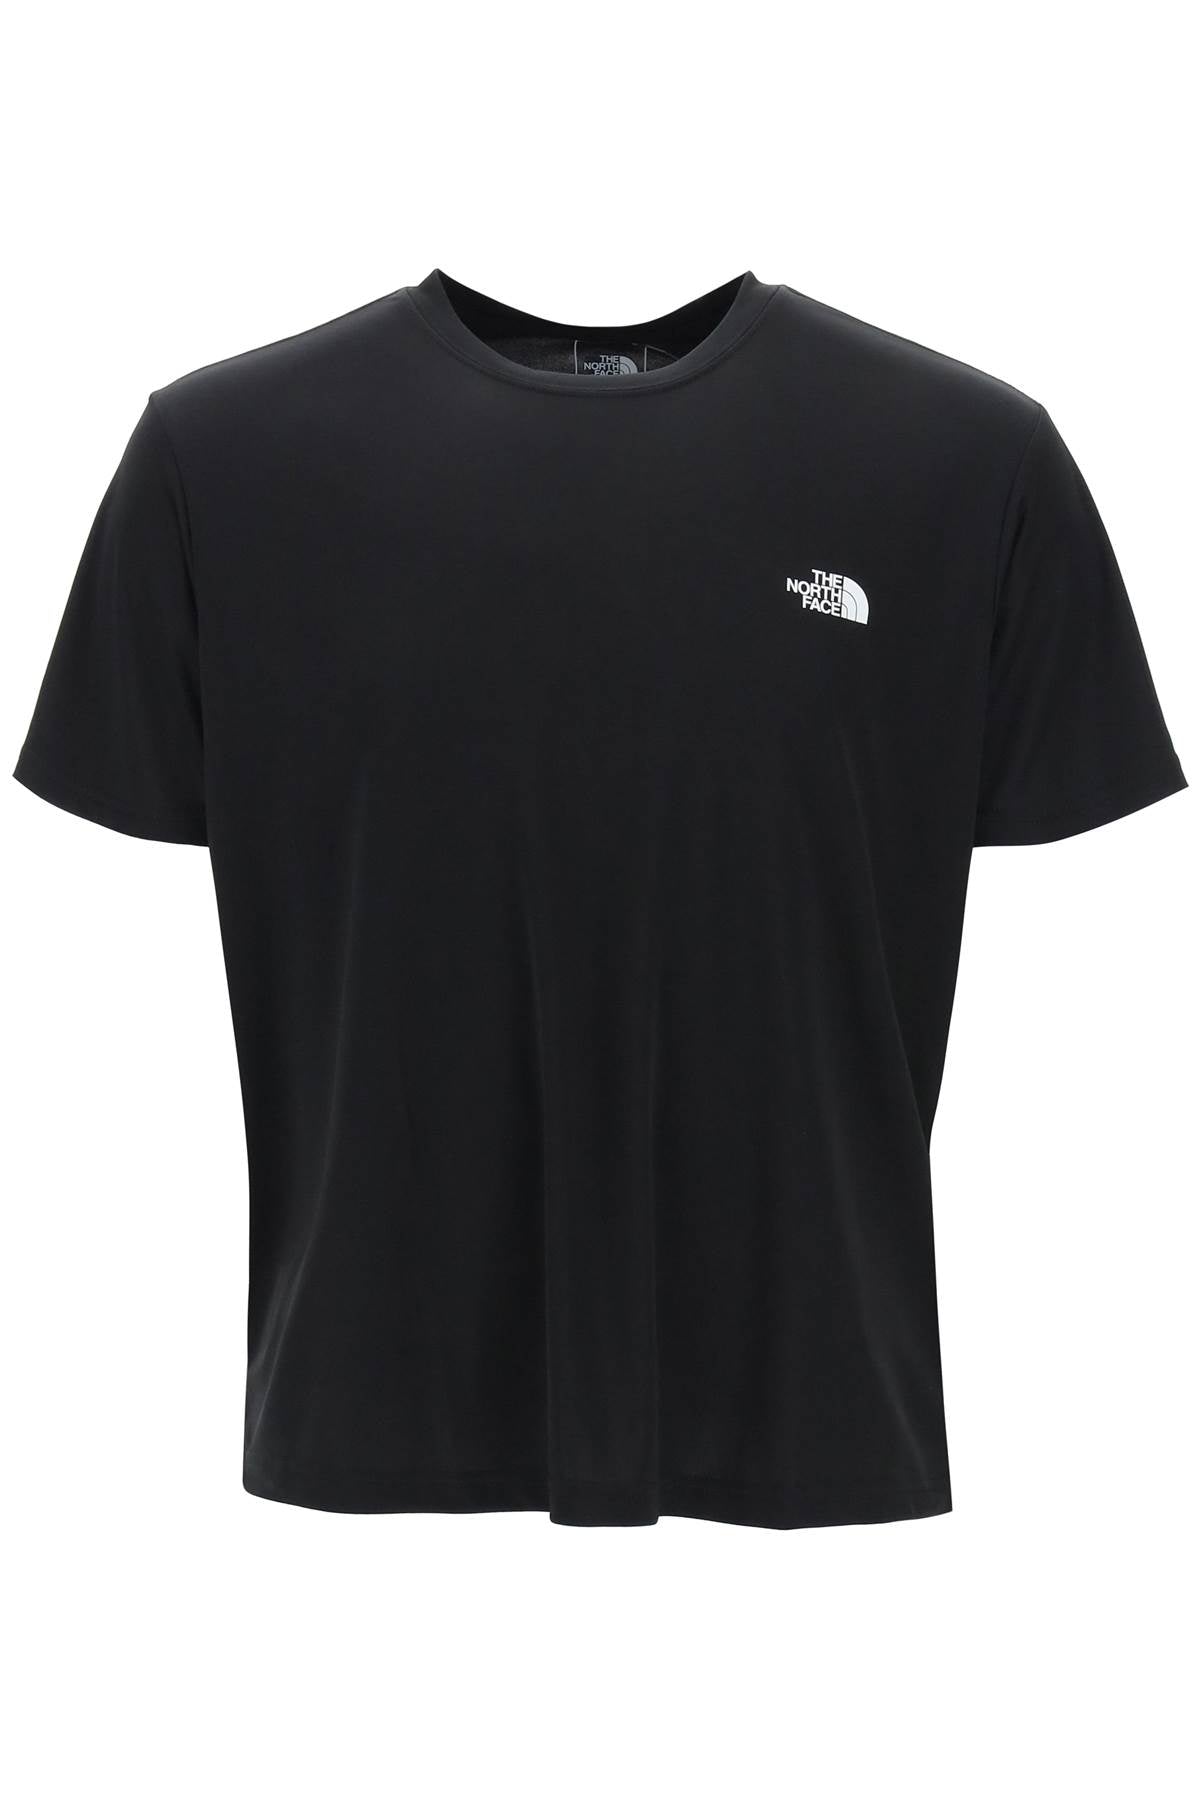 The north face reaxion t-0